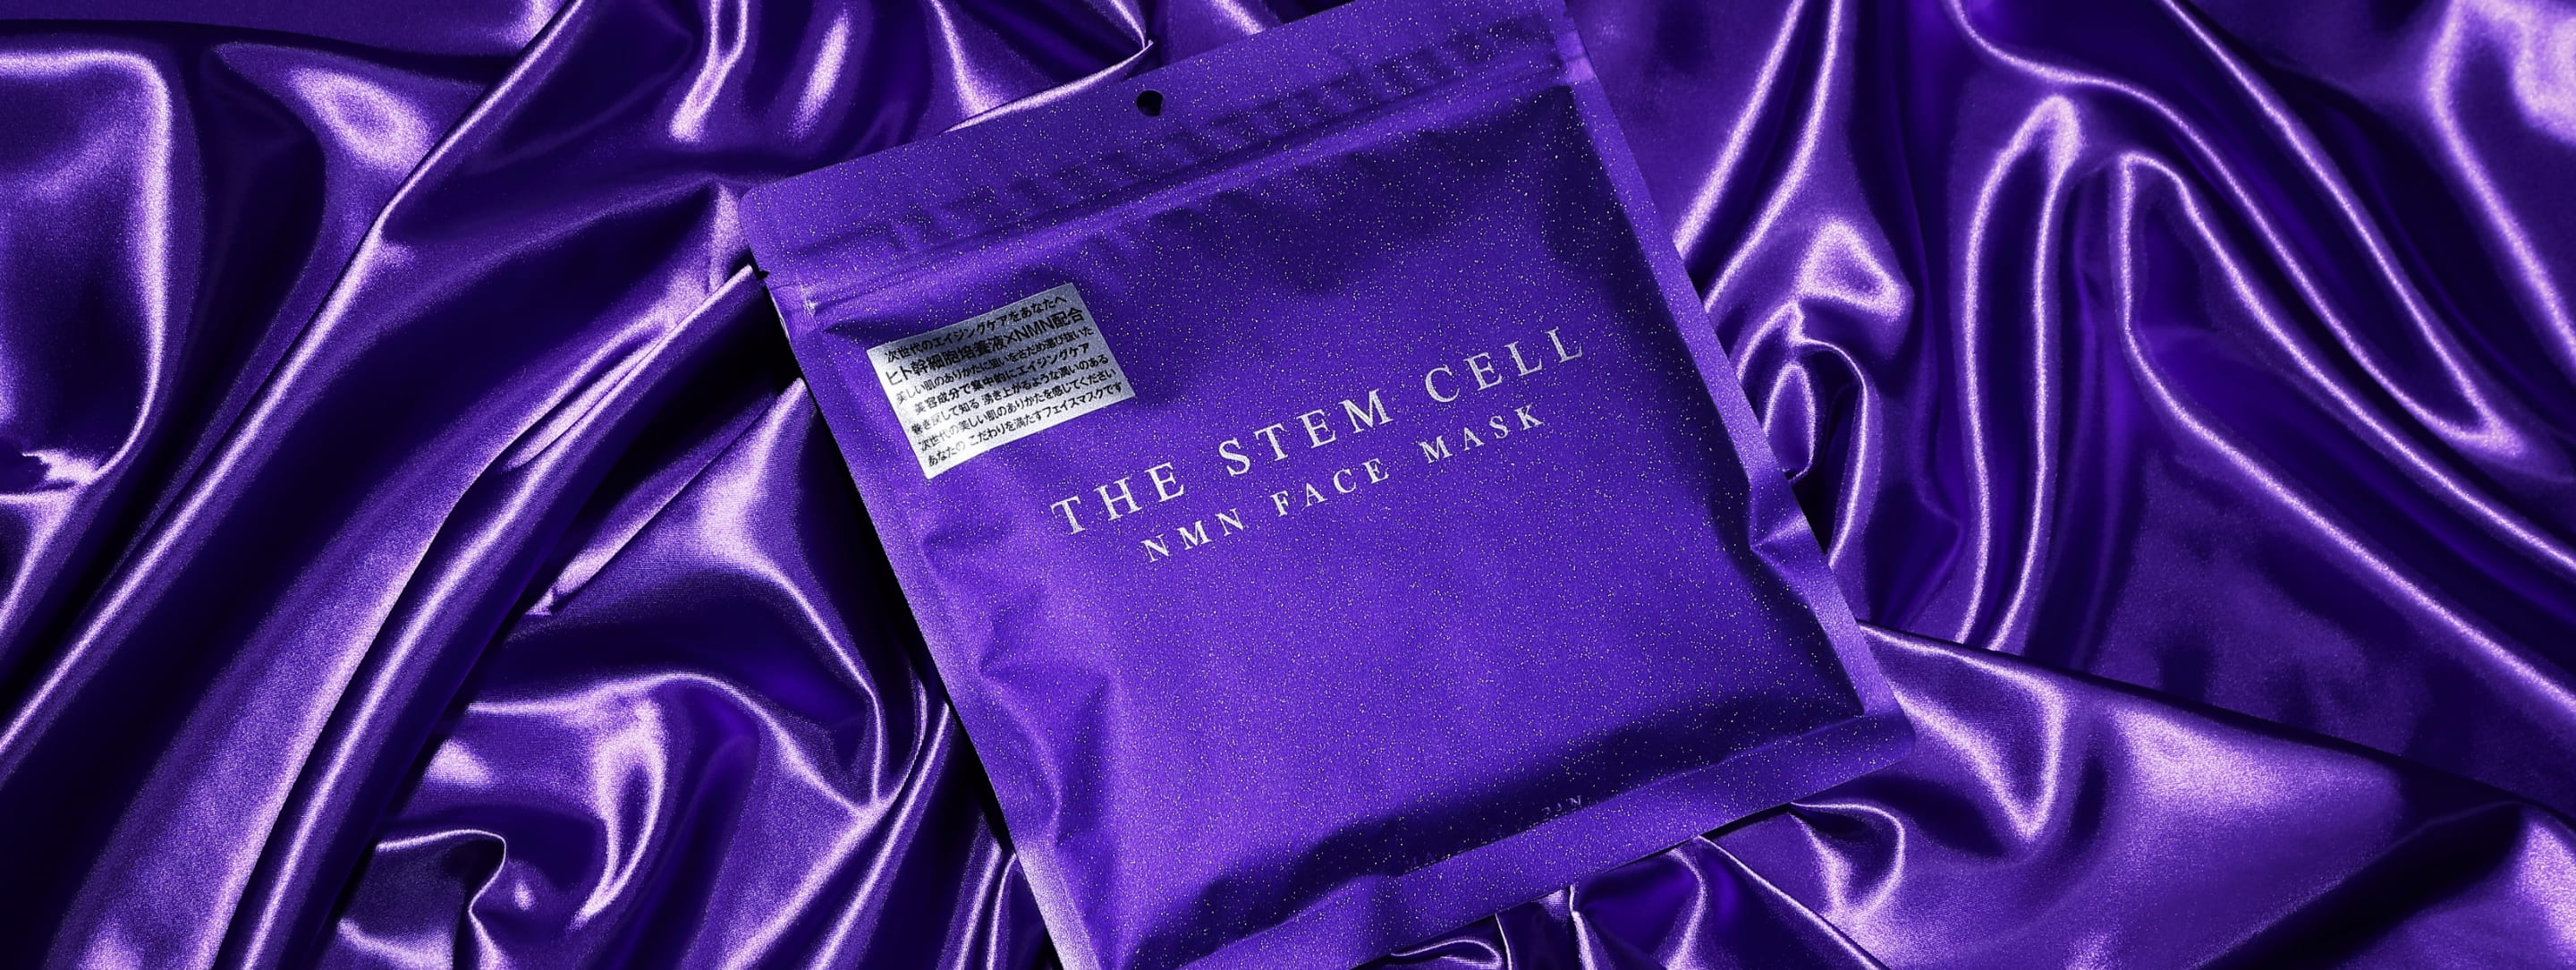 the stem cell nmn face mask